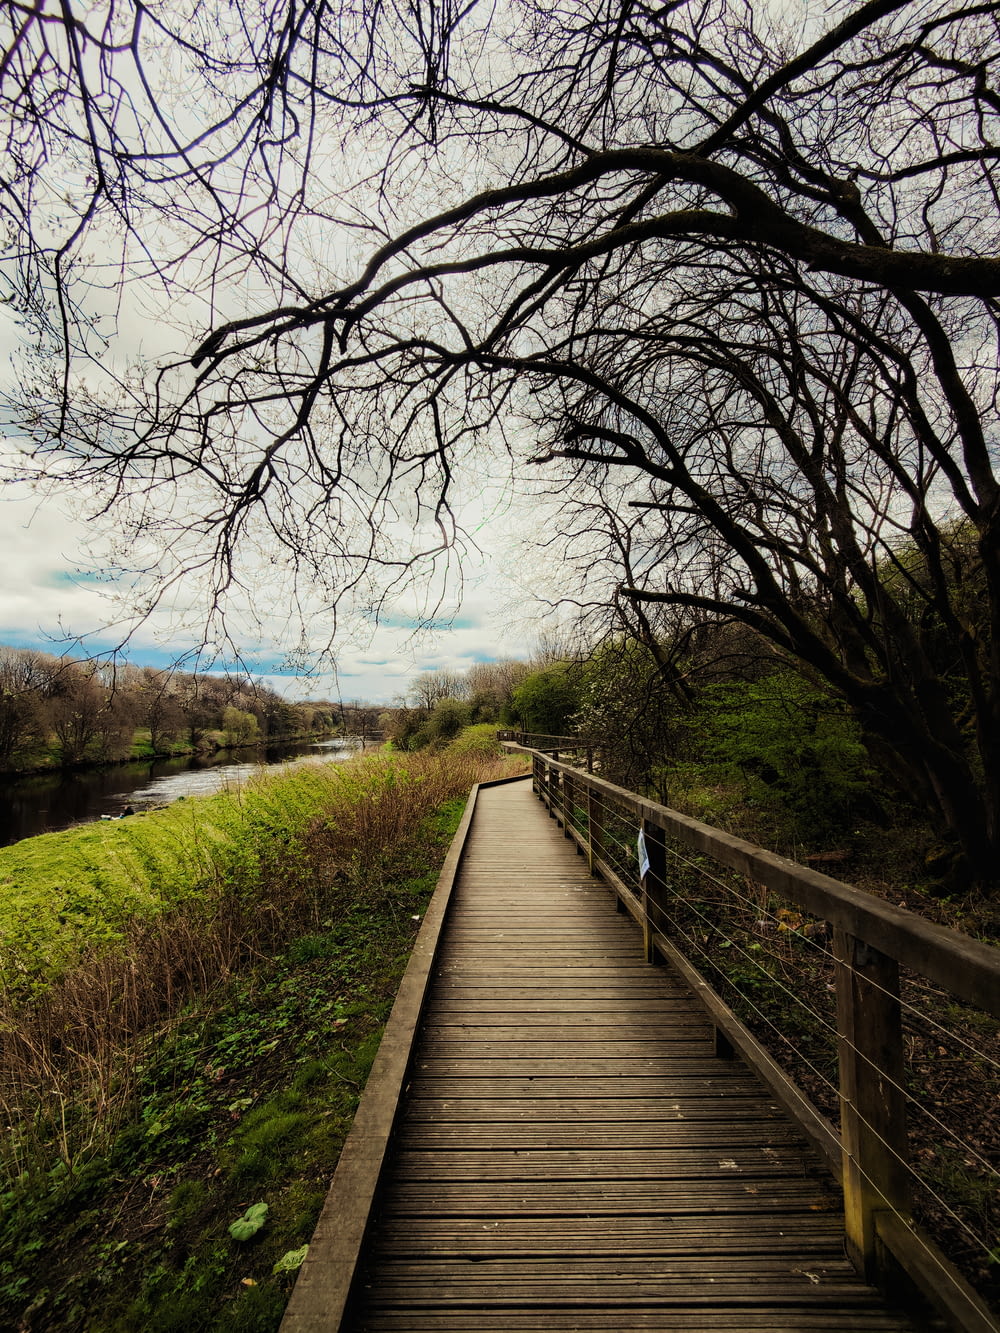 a wooden walkway next to a body of water